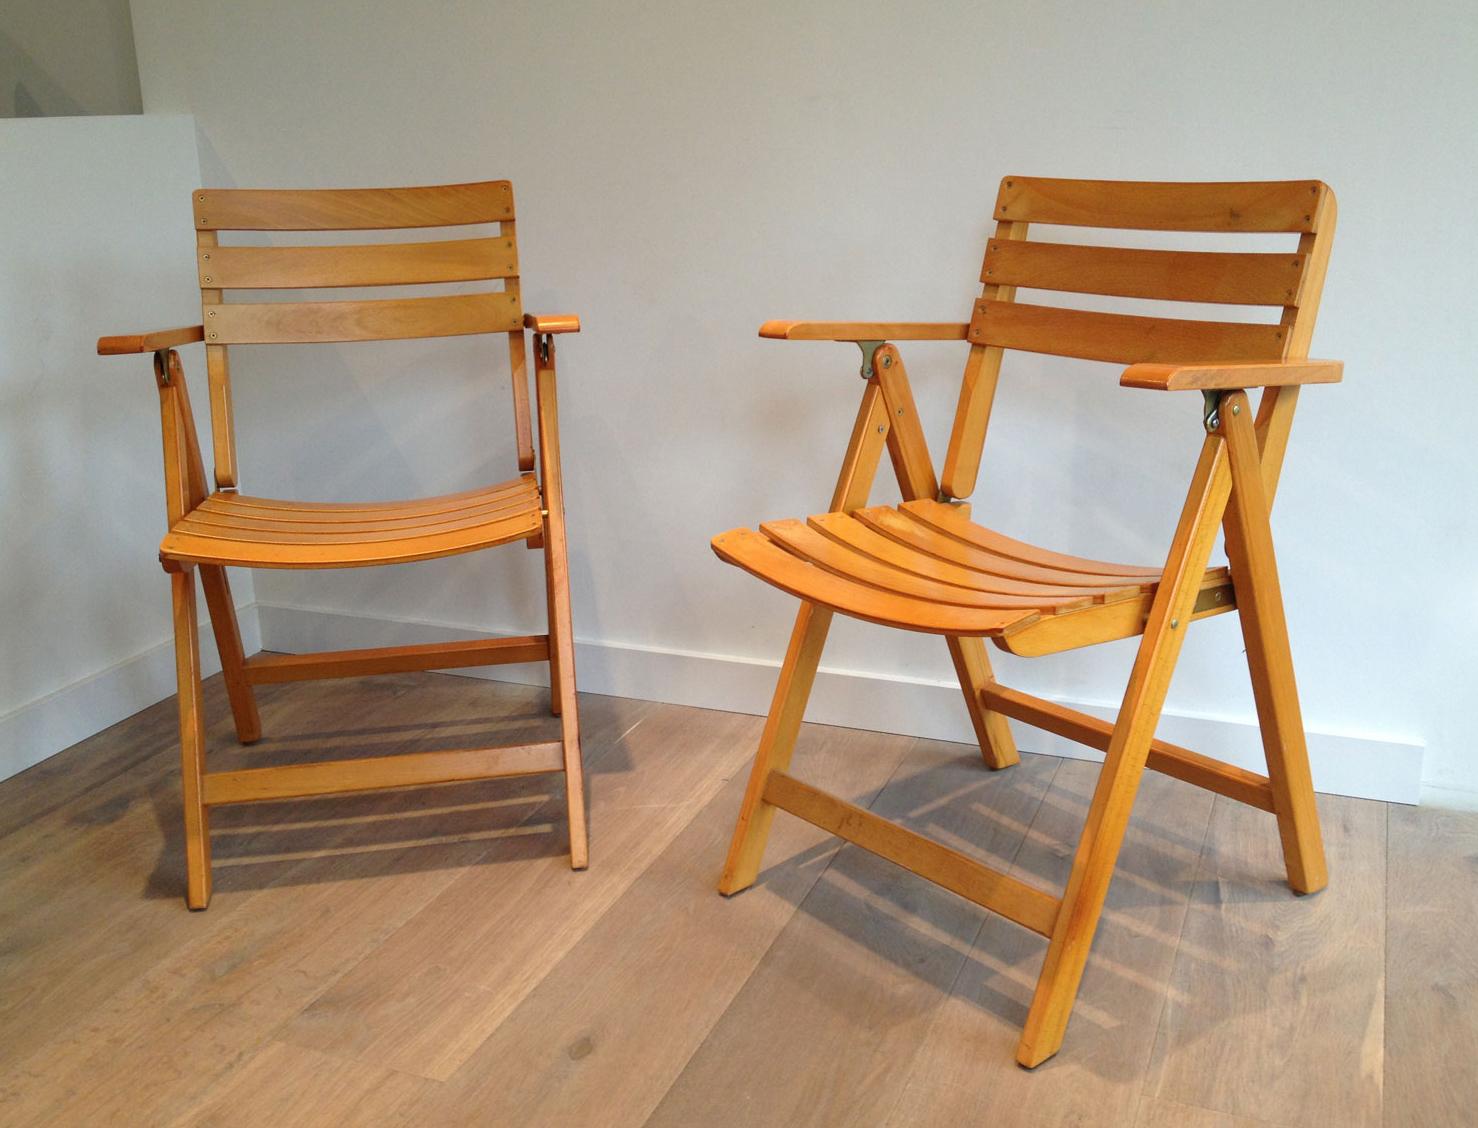 Pair of Wooden Armchairs, French Work Signed Clairitex, Circa 1970 For Sale 6